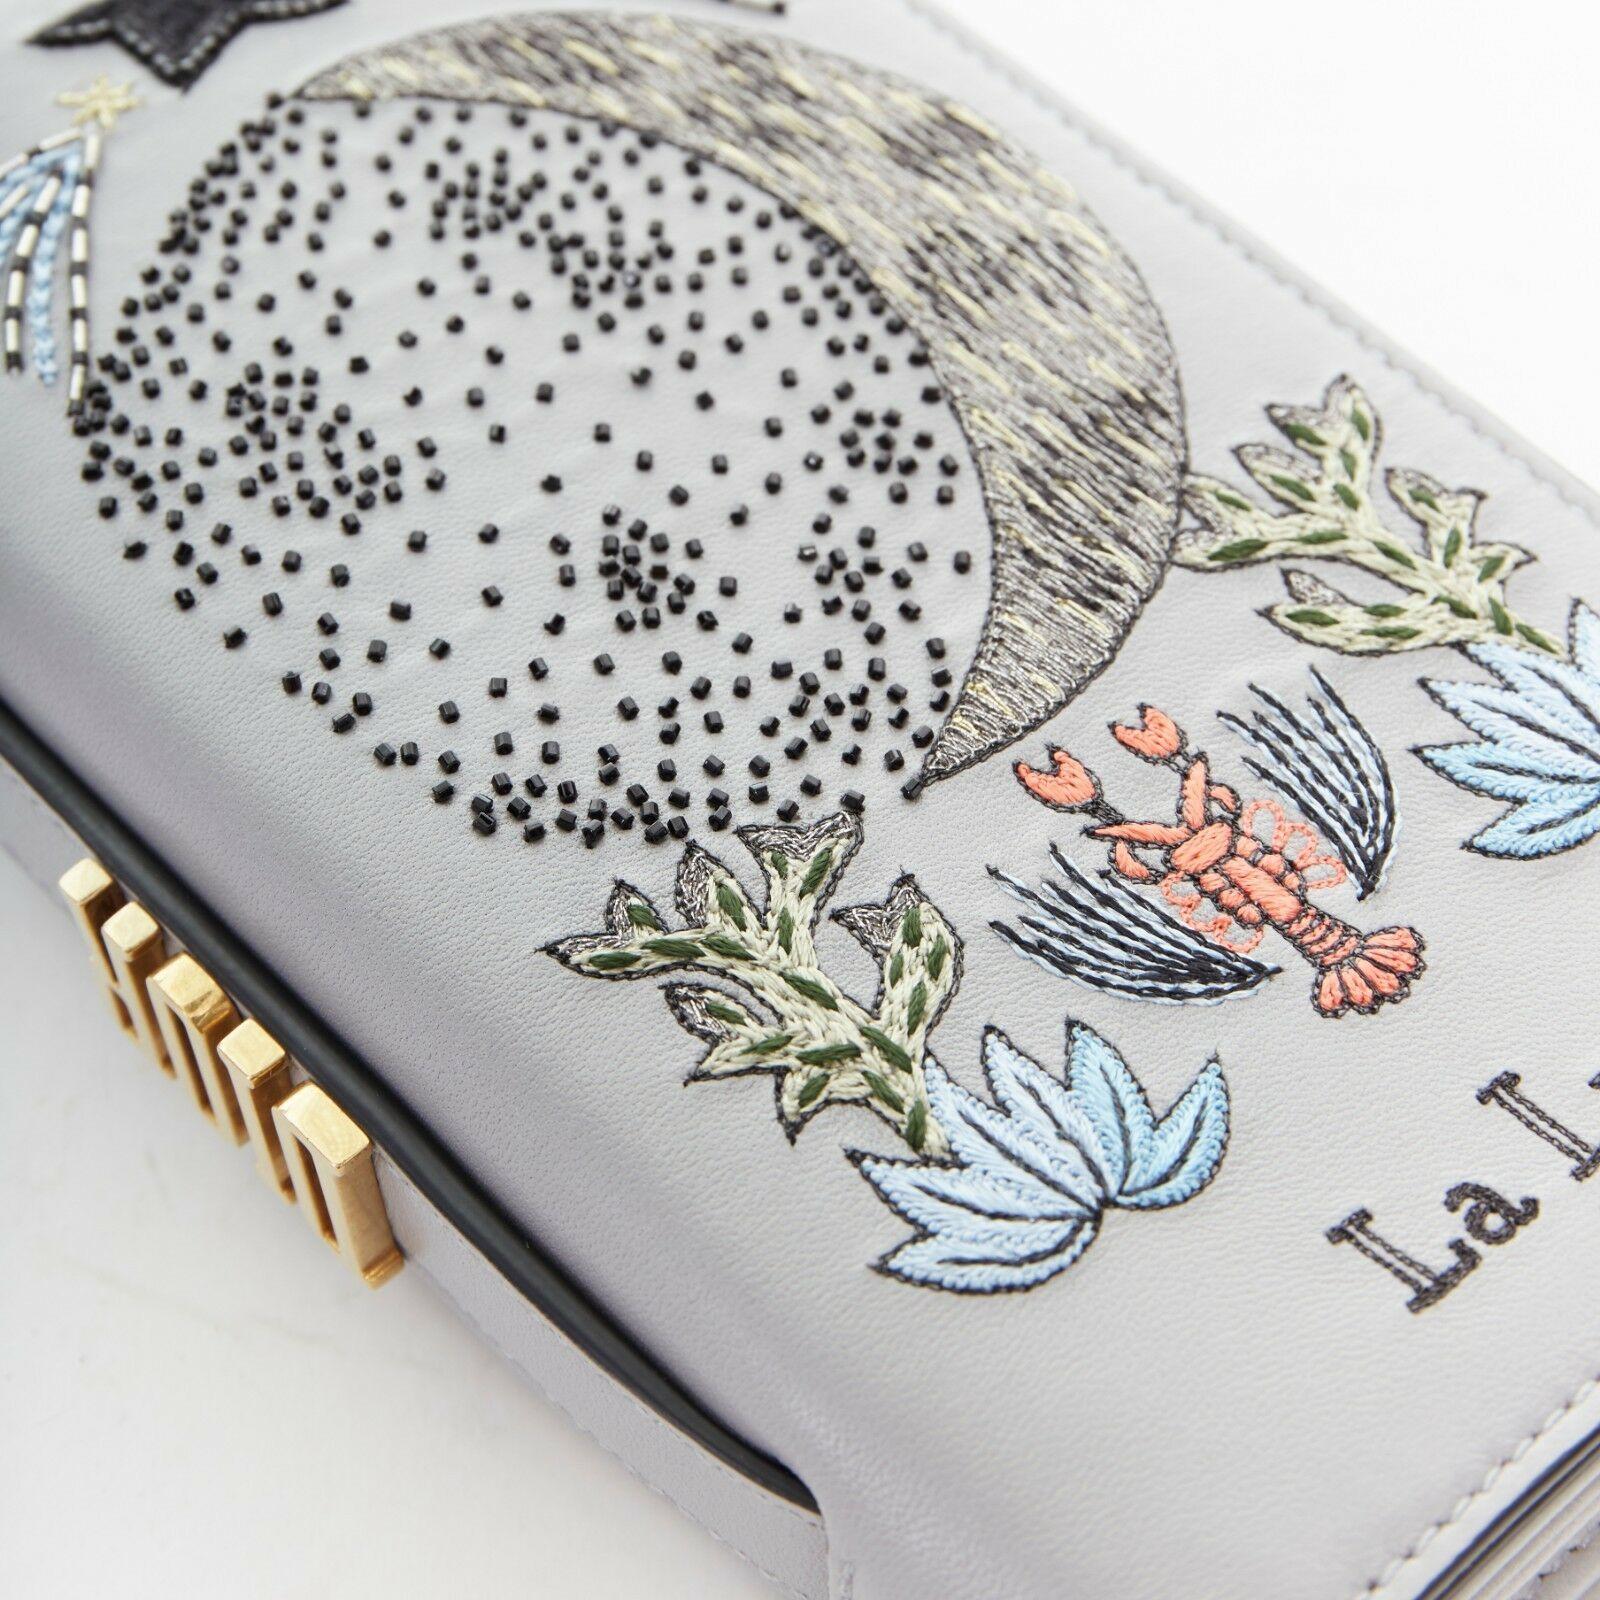 Women's CHRISTIAN DIOR SS17 La Lune Tarot embroidered grey leather mini clutch pouch bag